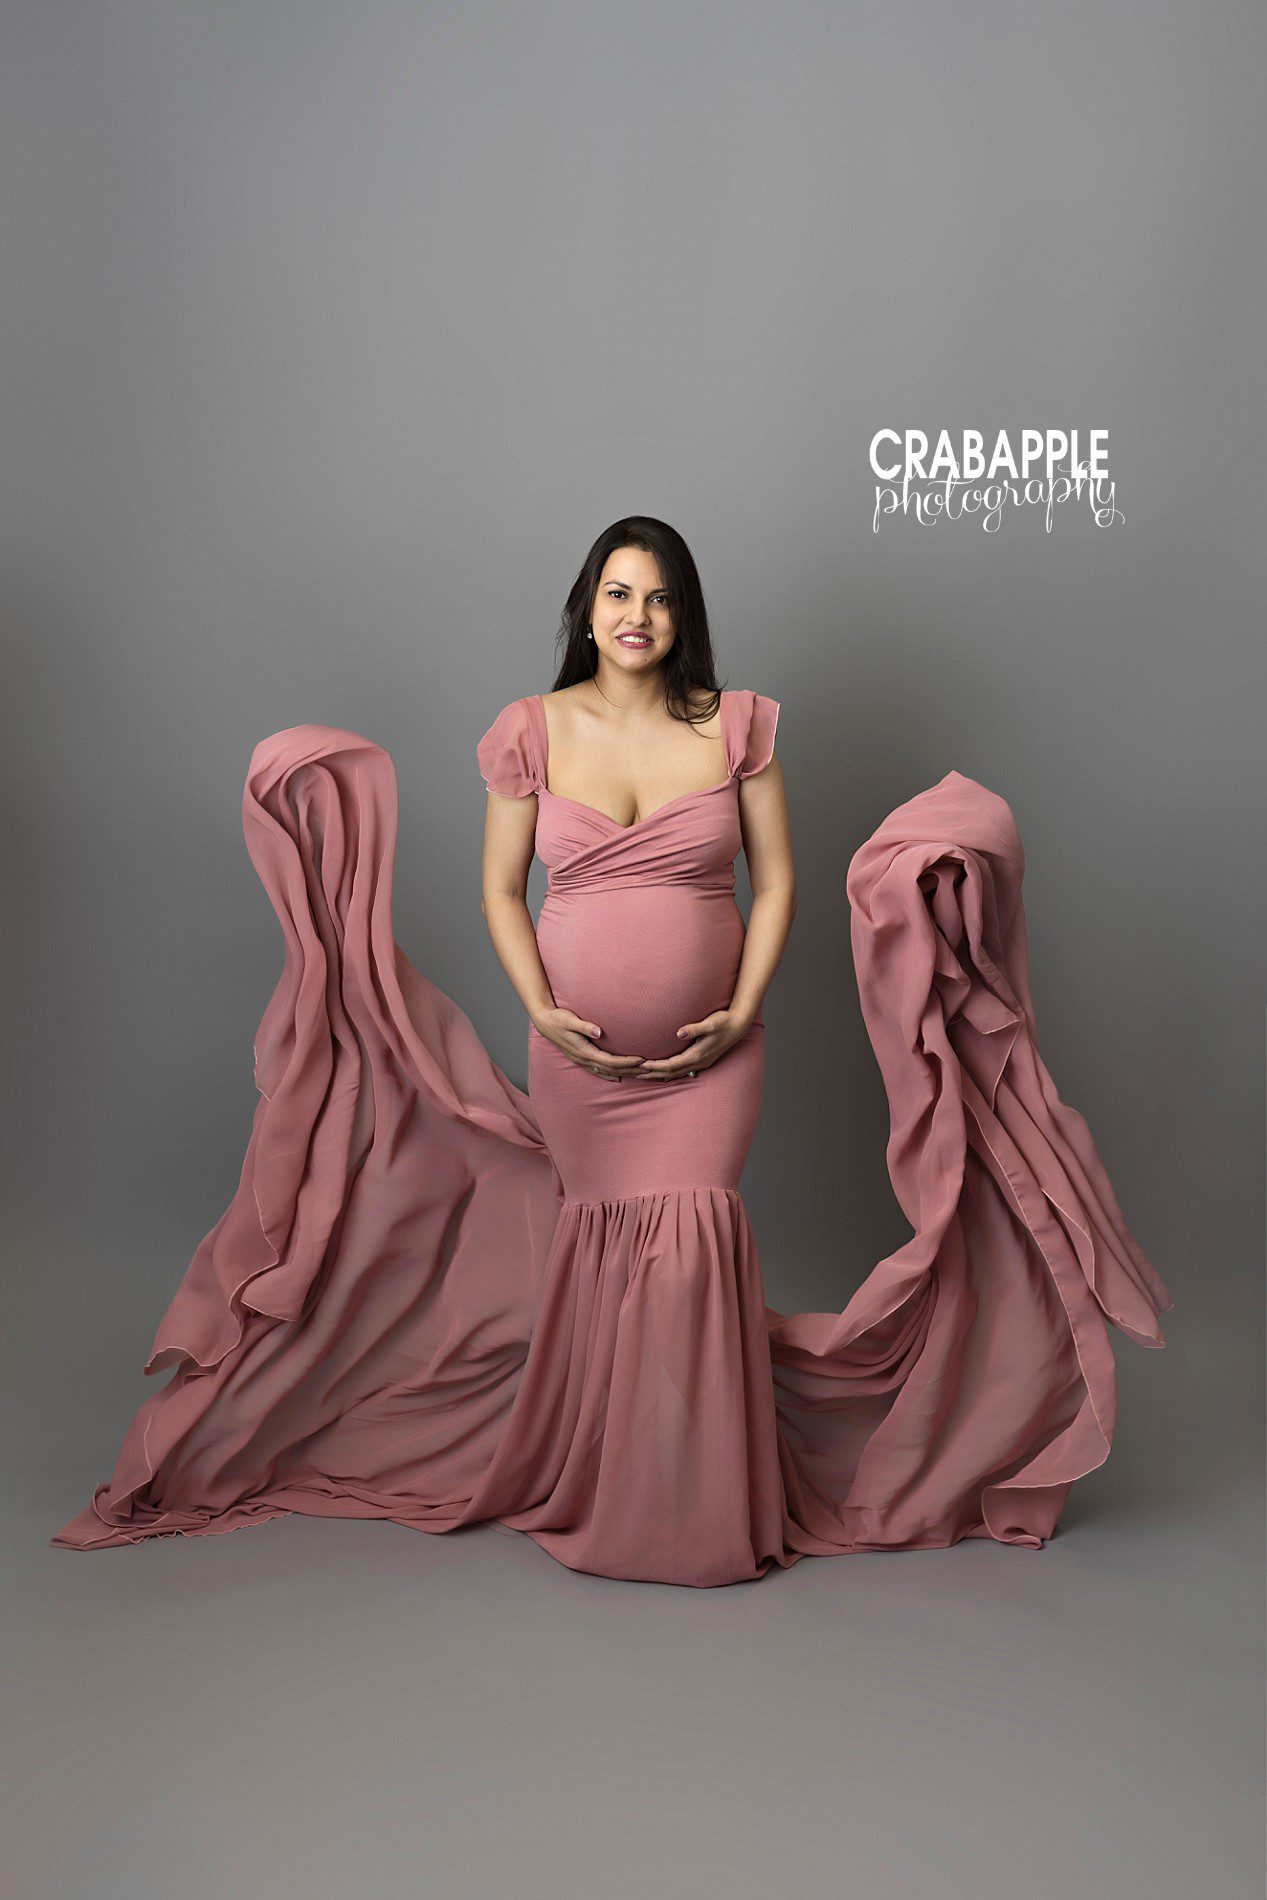 stunning maternity portraits using pink and gray